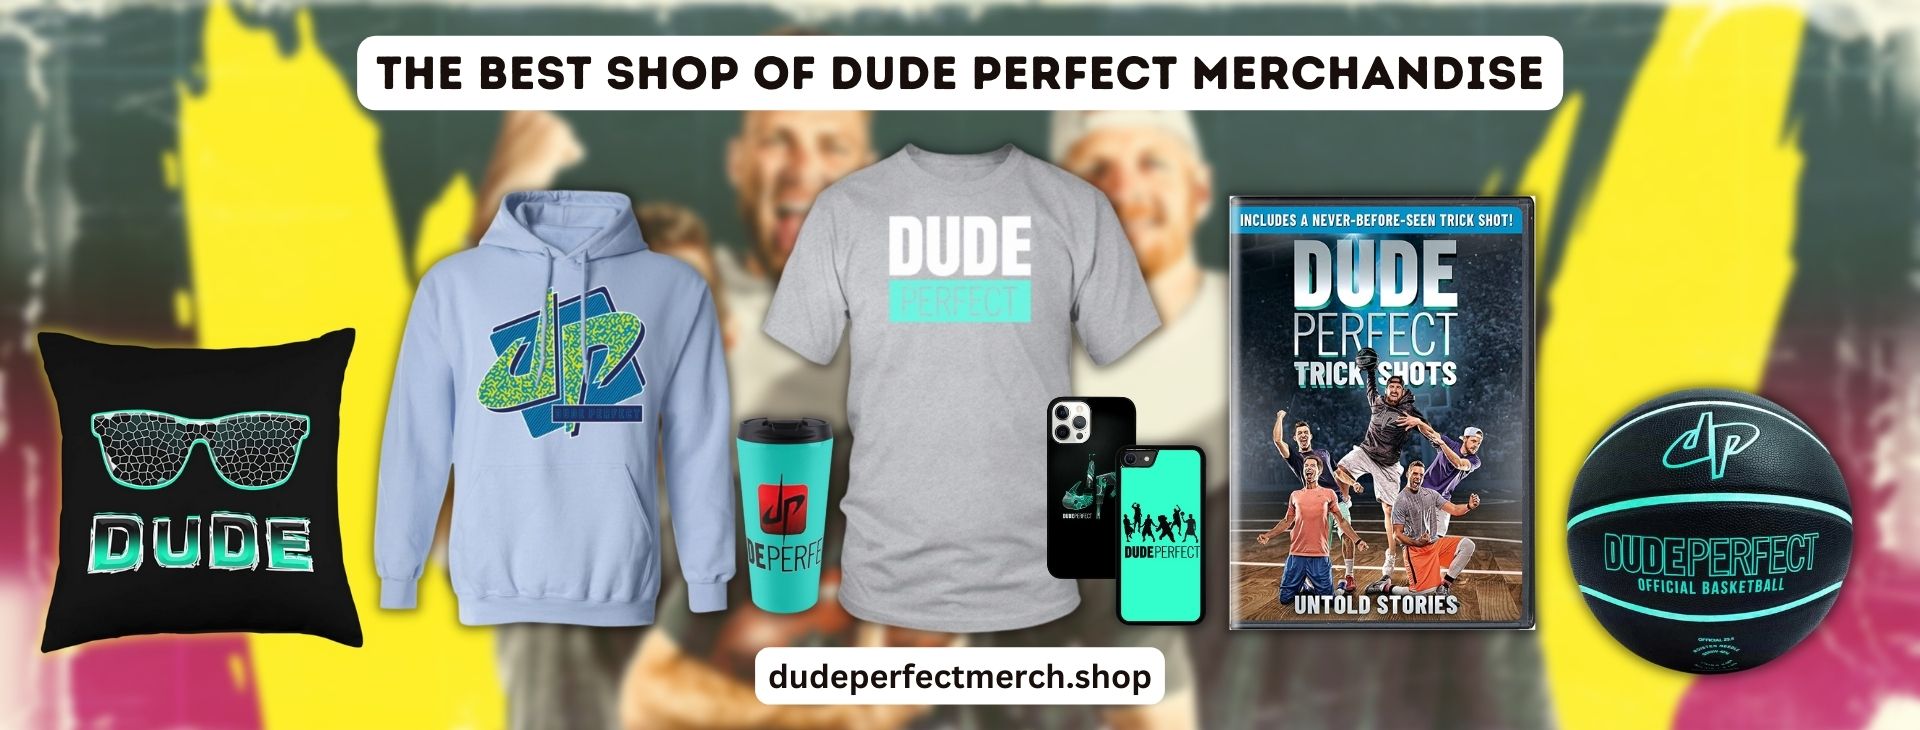 Dude Perfect Banner - Dude Perfect Merch